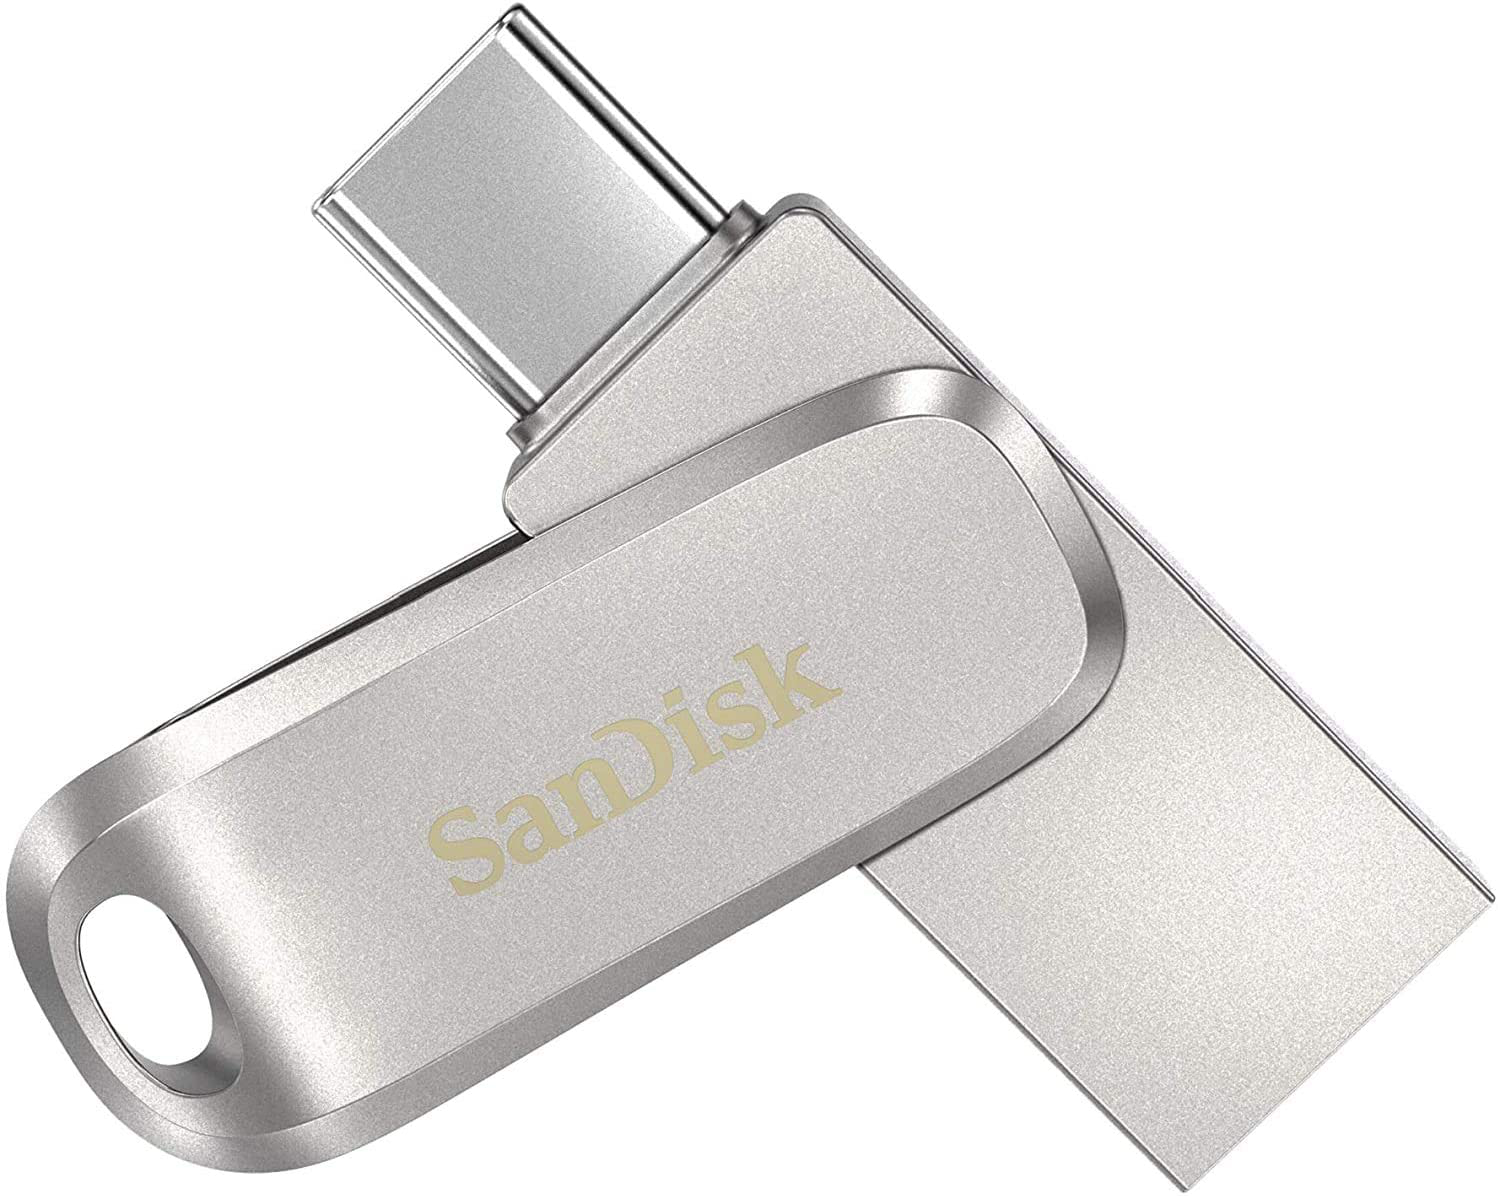 Sandisk Ultra Dual Drive Luxe USB Type-C 128GB Flash Drive for Smartphones, Tablets, and Computers - High Speed USB 3.1 Pen Drive (SDDDC4-128G-G46) Bundle with (1) Everything but Stromboli Lanyard